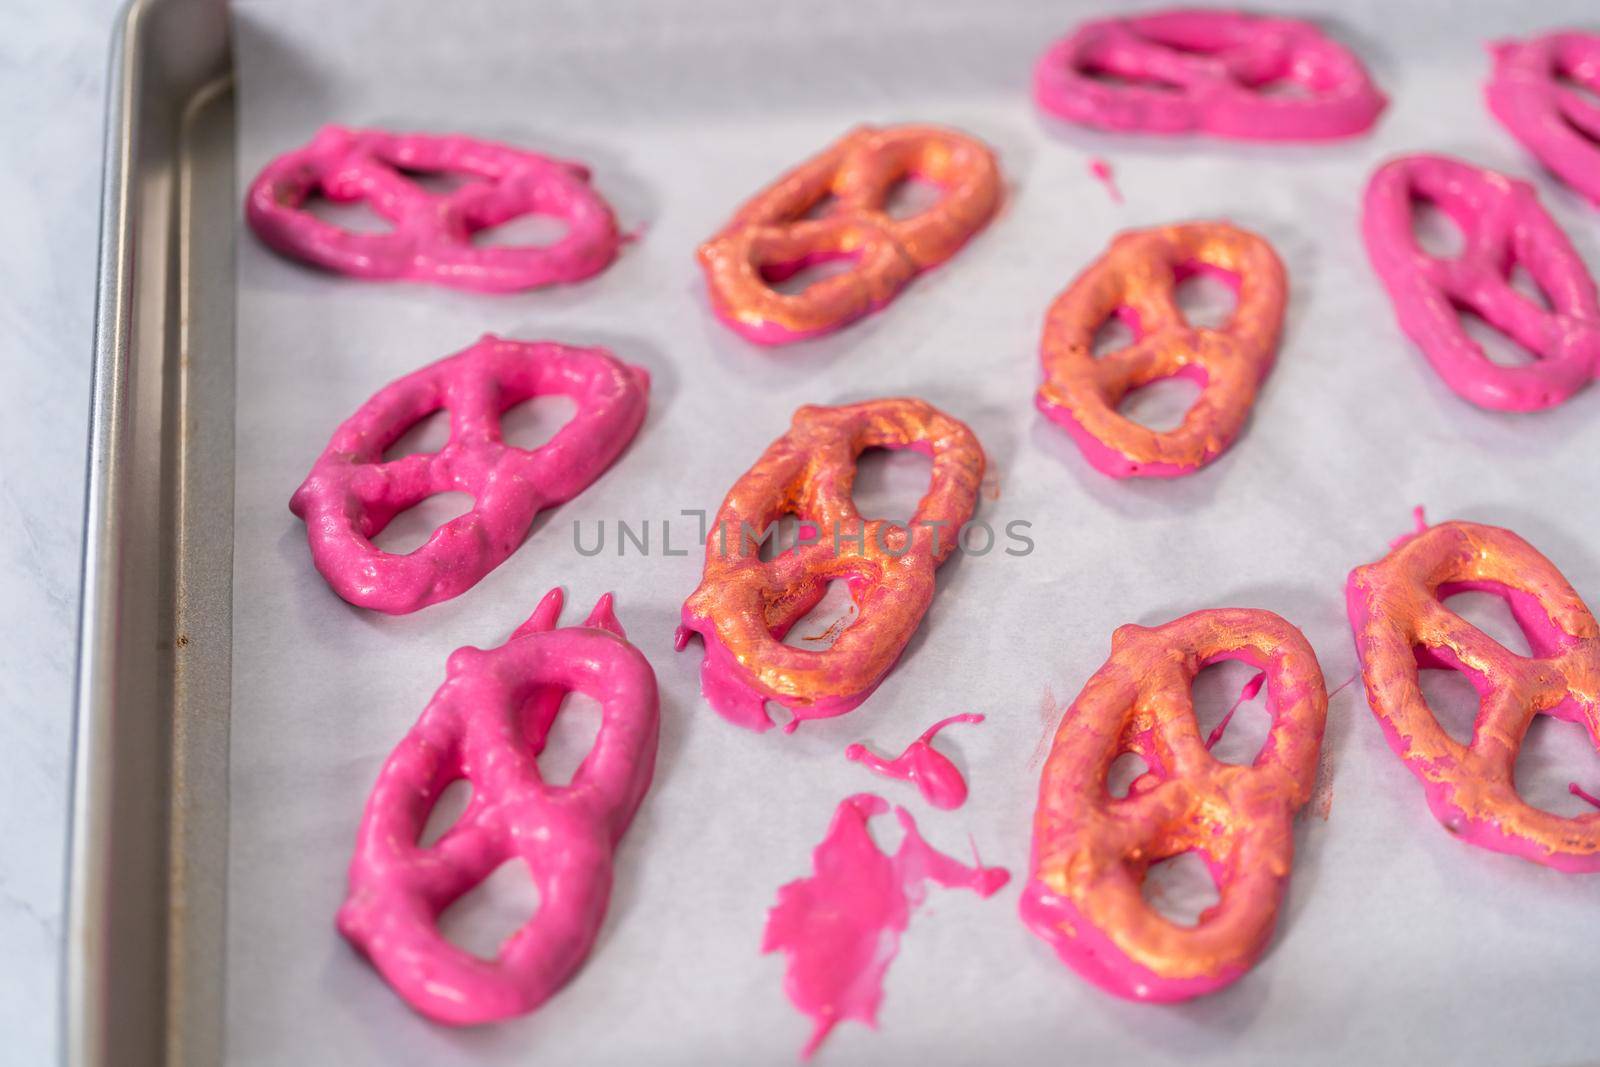 Painting chocolate-covered pretzel twists with glittery luster.